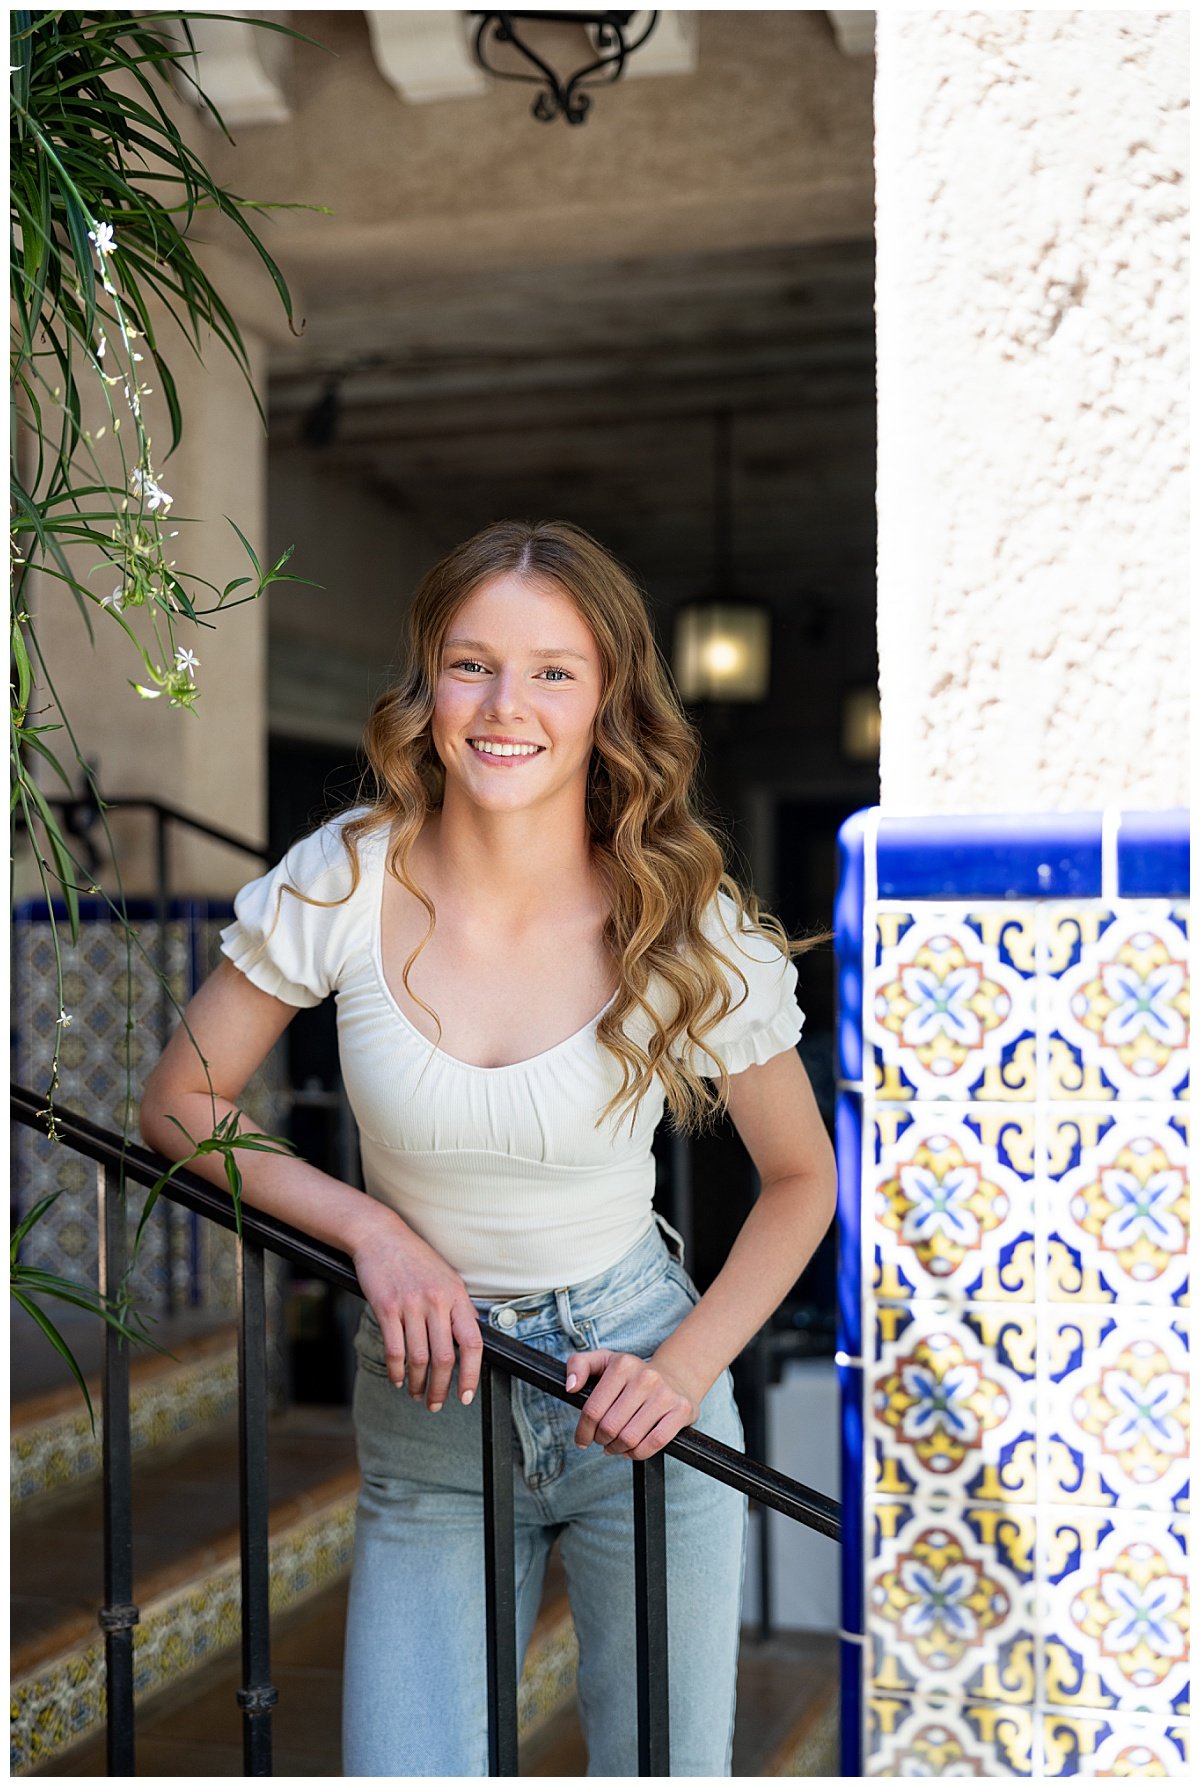 Wearing a white cap sleeve blouse and light wash jeans, a high school senior leans over a black iron handrail next to blue, orange, and white southwestern style tiles during an Arizona senior session.